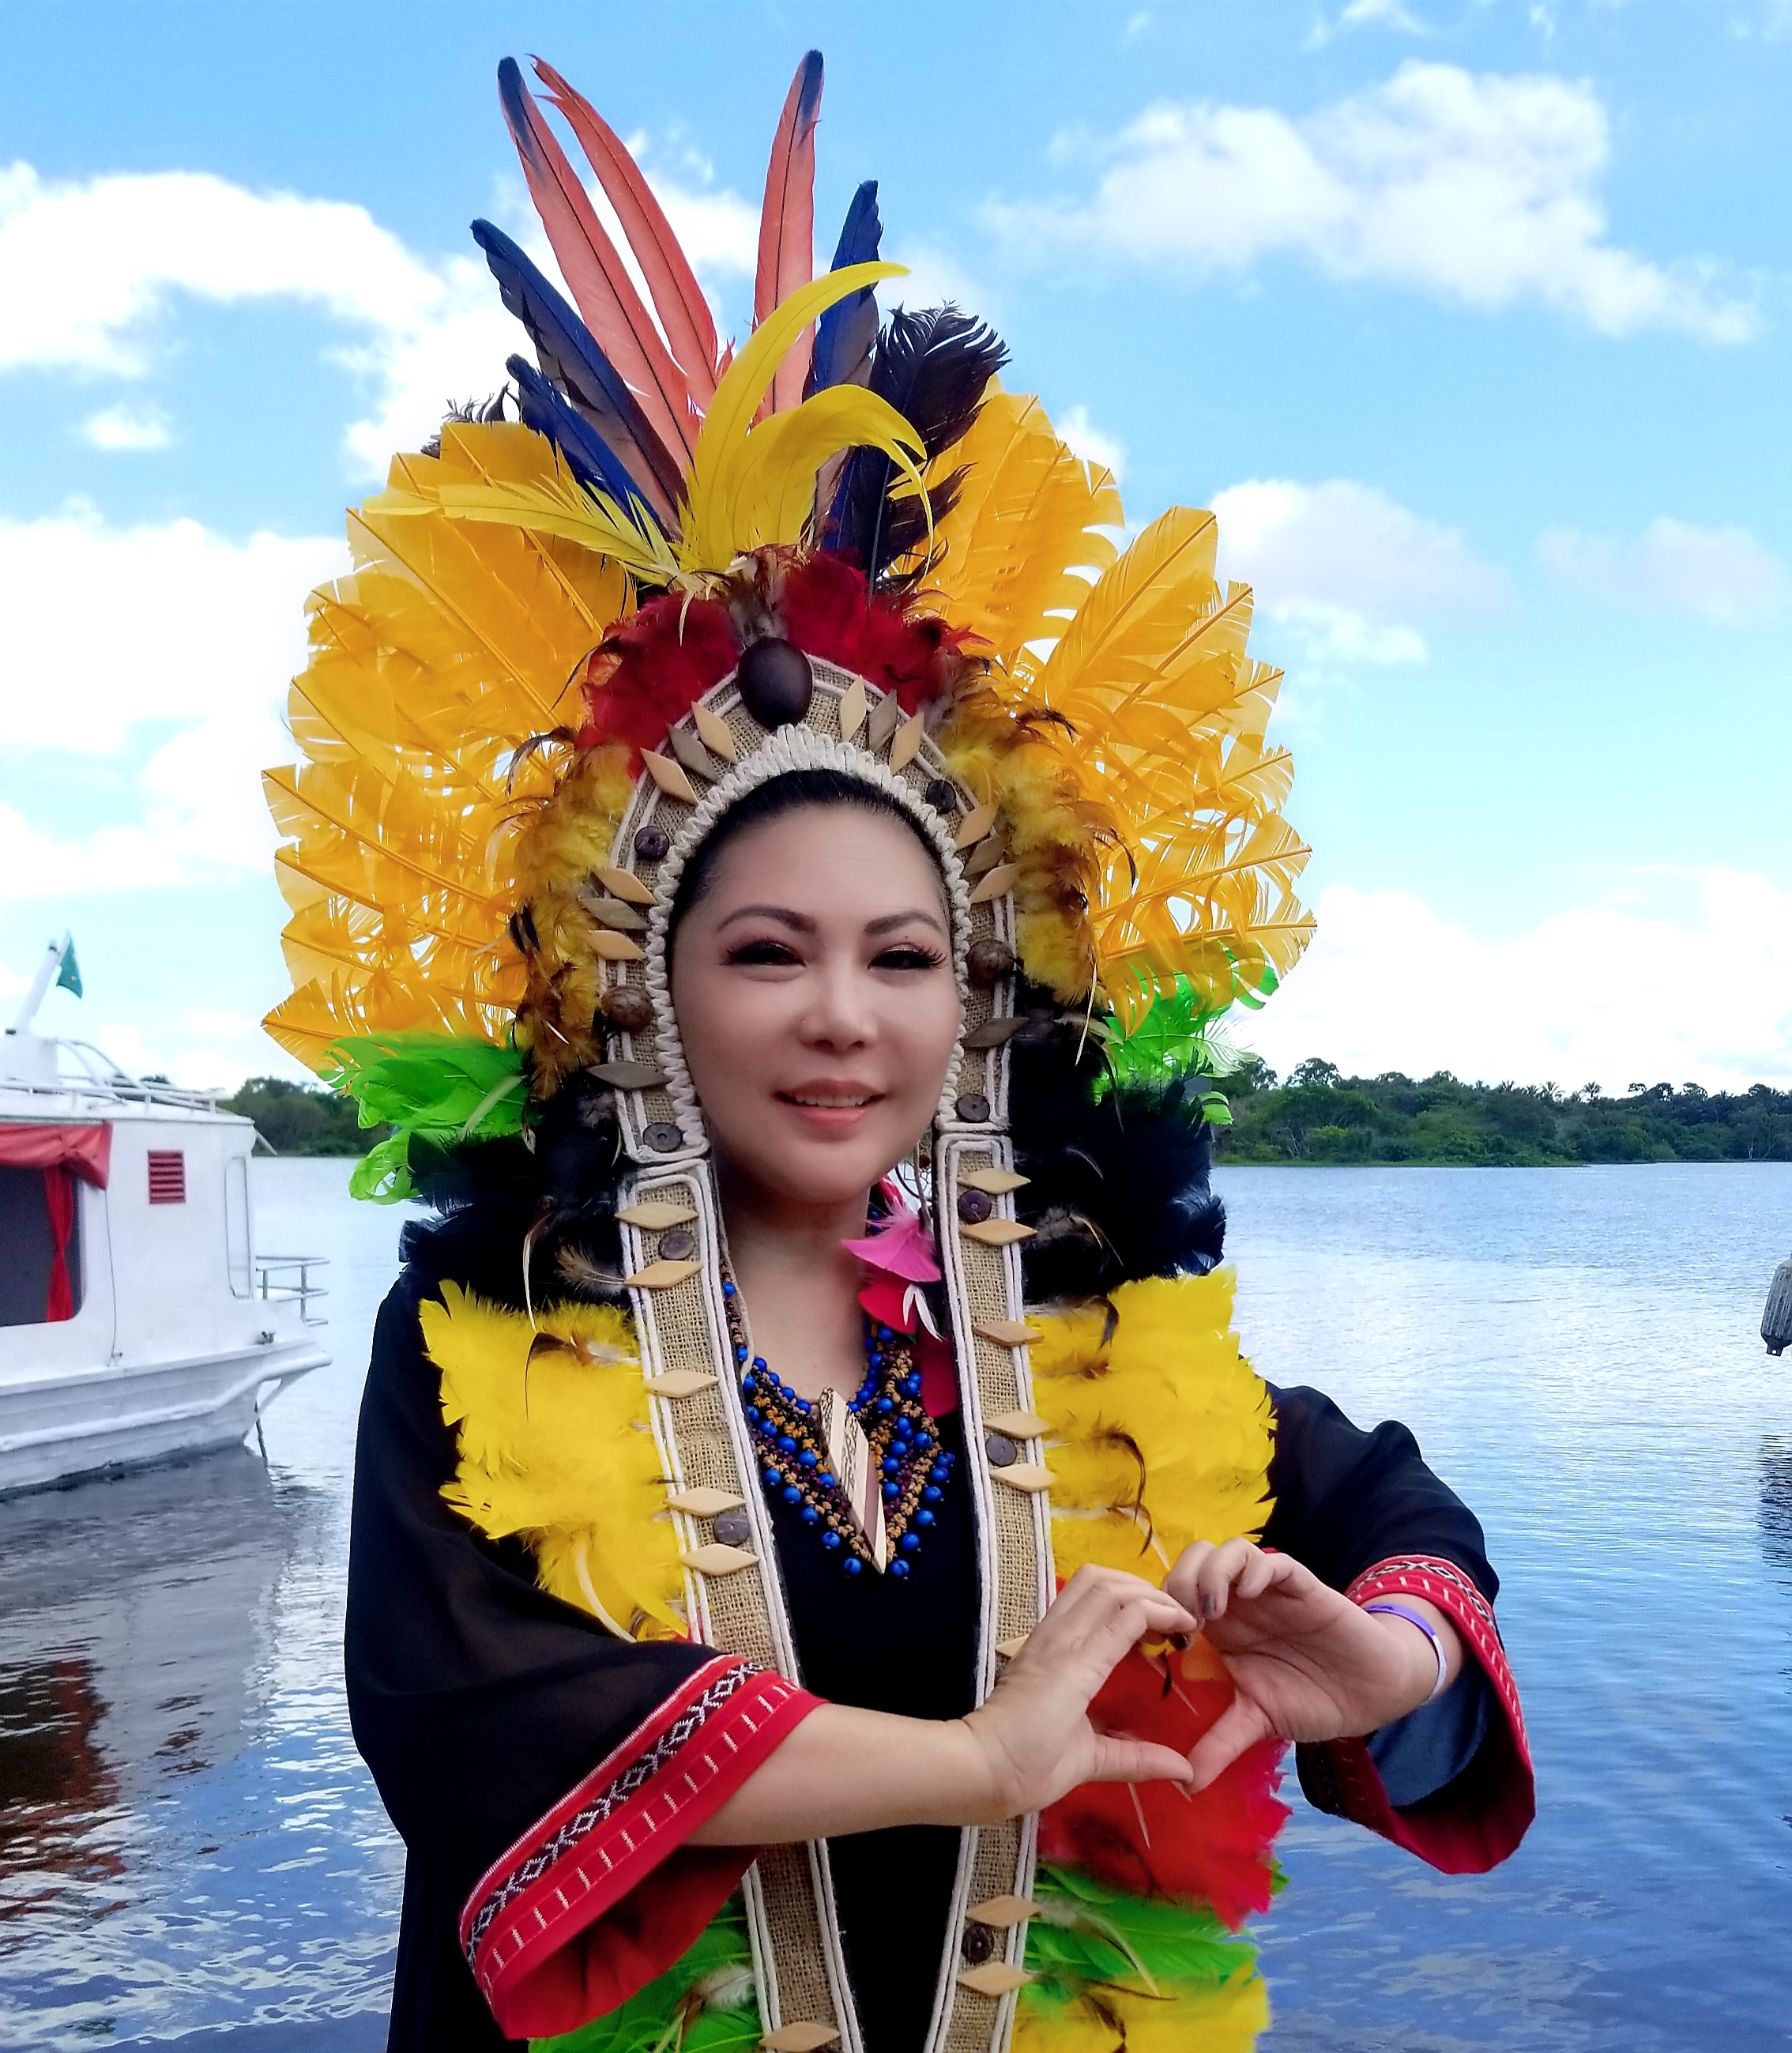 The Traveling Princess Meets Mayor of Manaus and Explored the Amazon